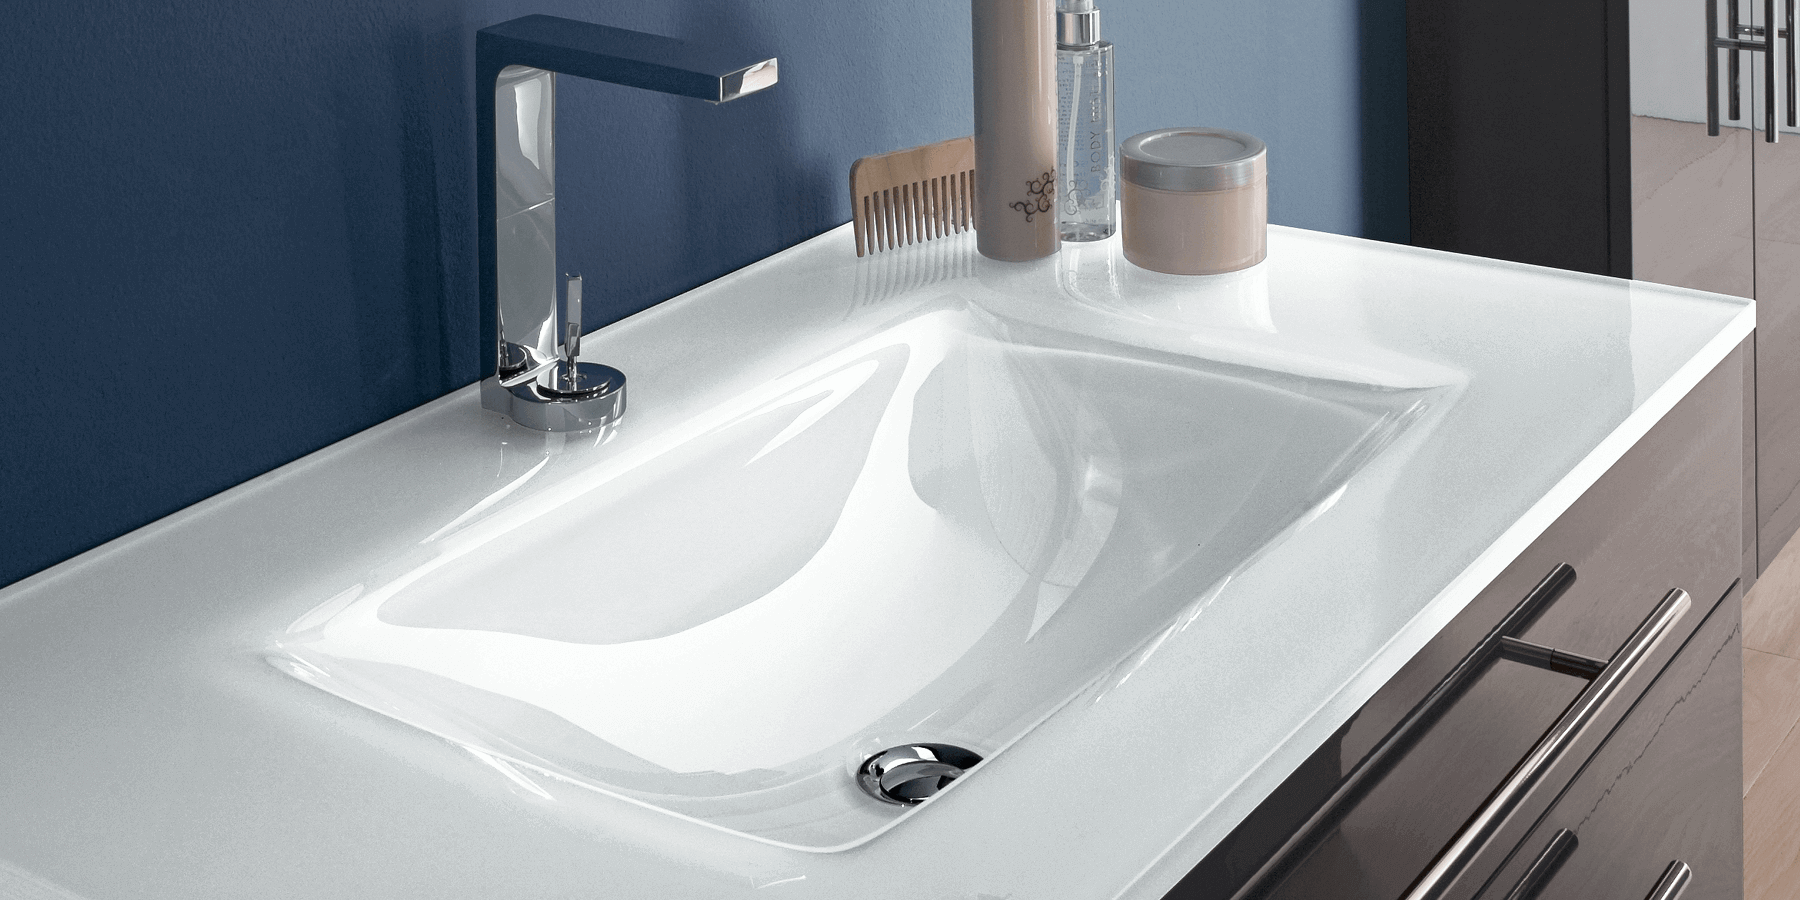 Luxury opaque white glass countertop with an integrated basin